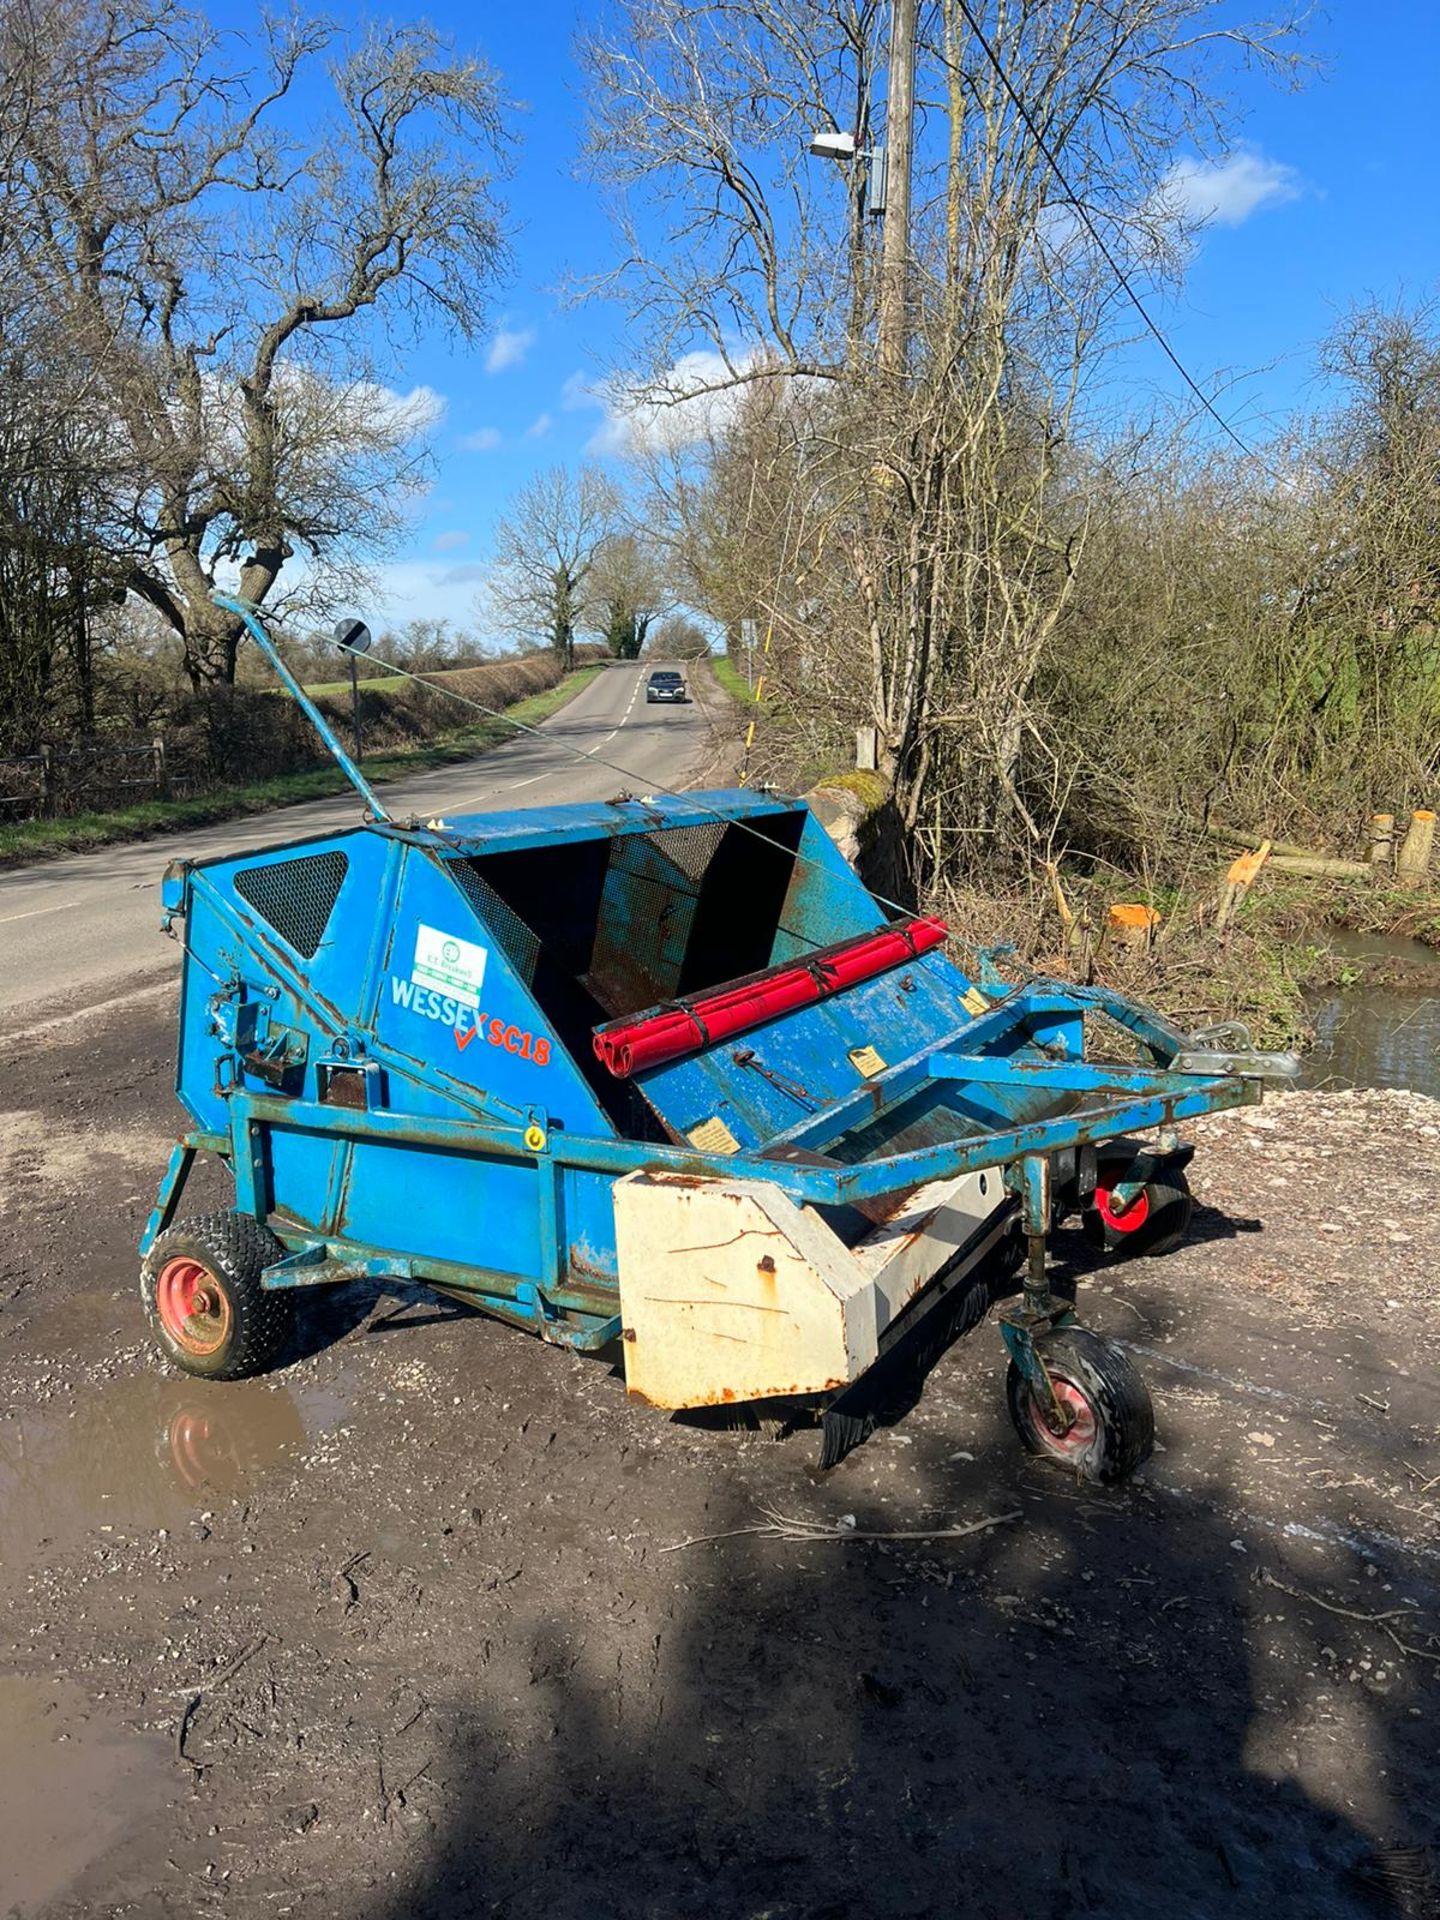 WESSEX SC18 TOW BEHIND PTO SWEEPER COLLECTOR *PLUS VAT*